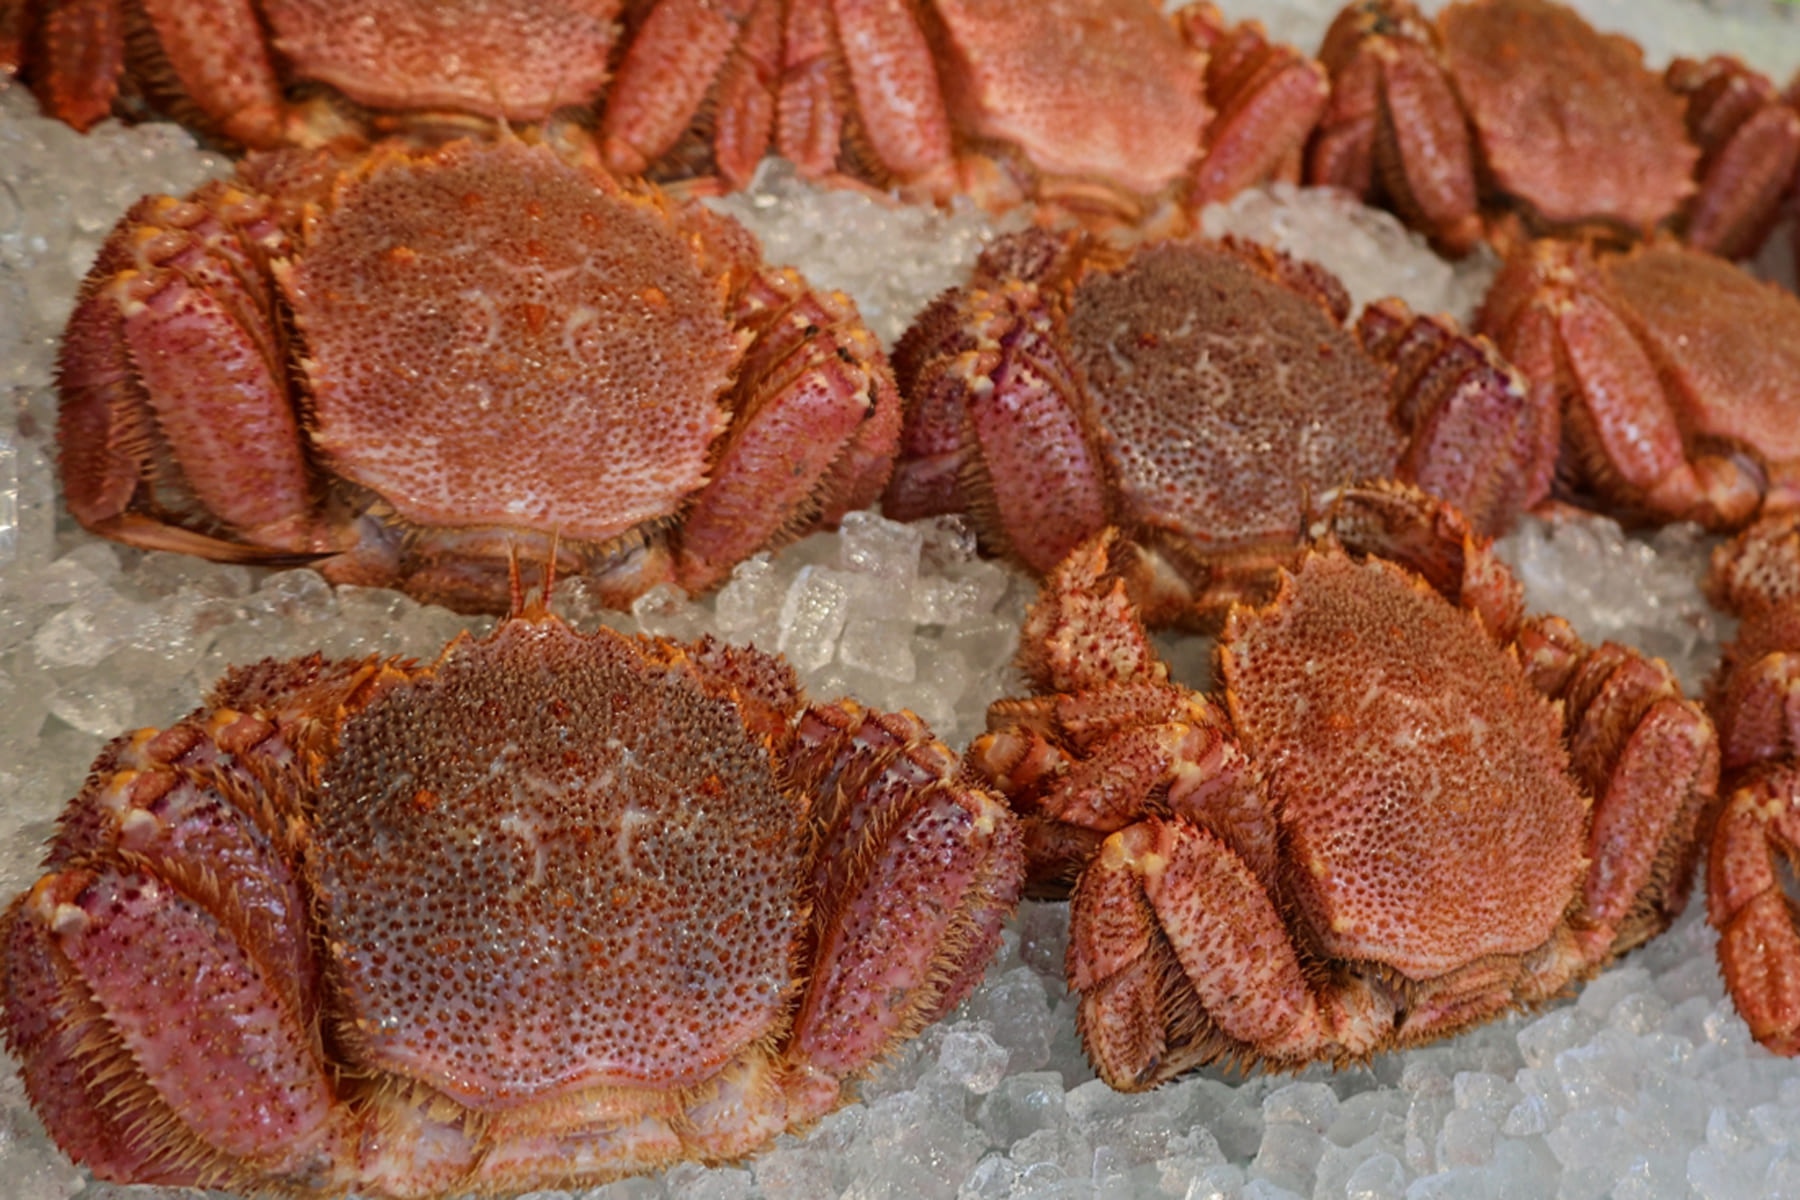 Frozen boiled hairy crab